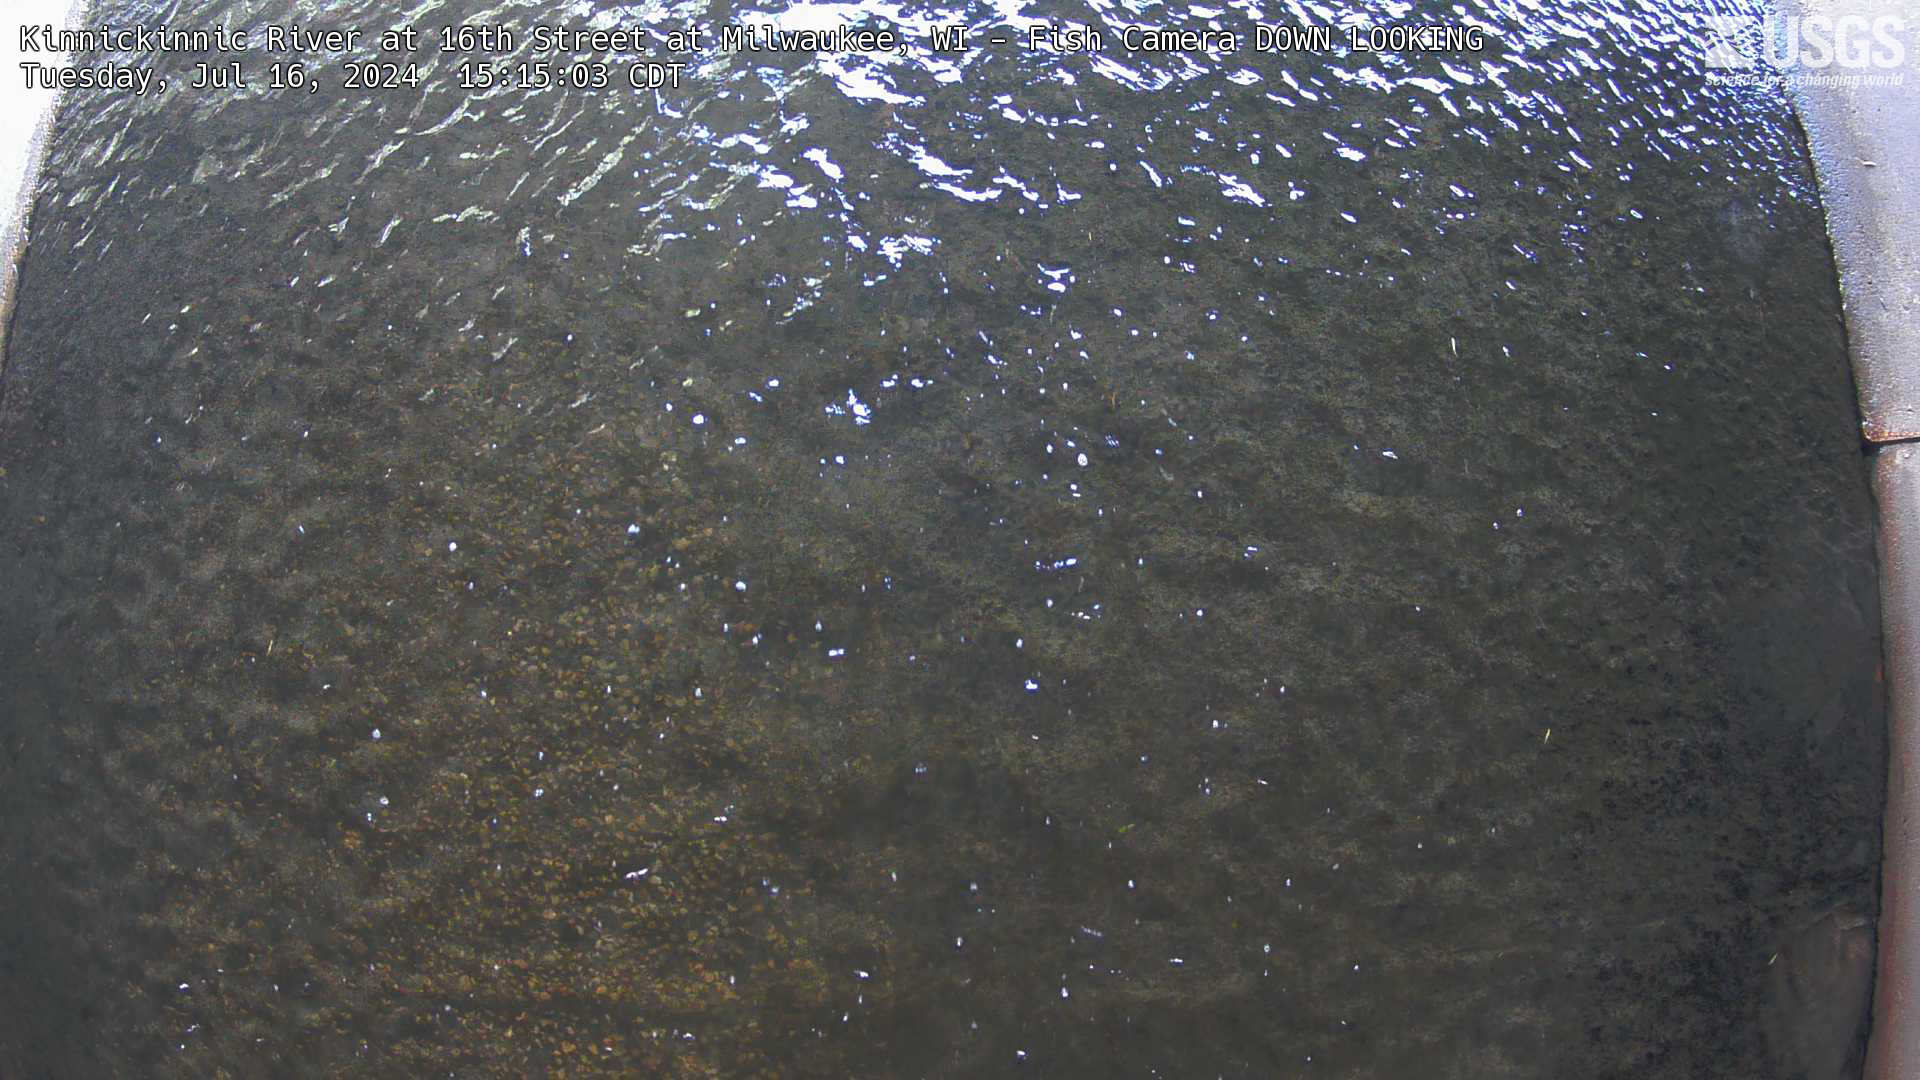 Time lapse video of webcam pointed directly down at surface of stream for fish monitoring